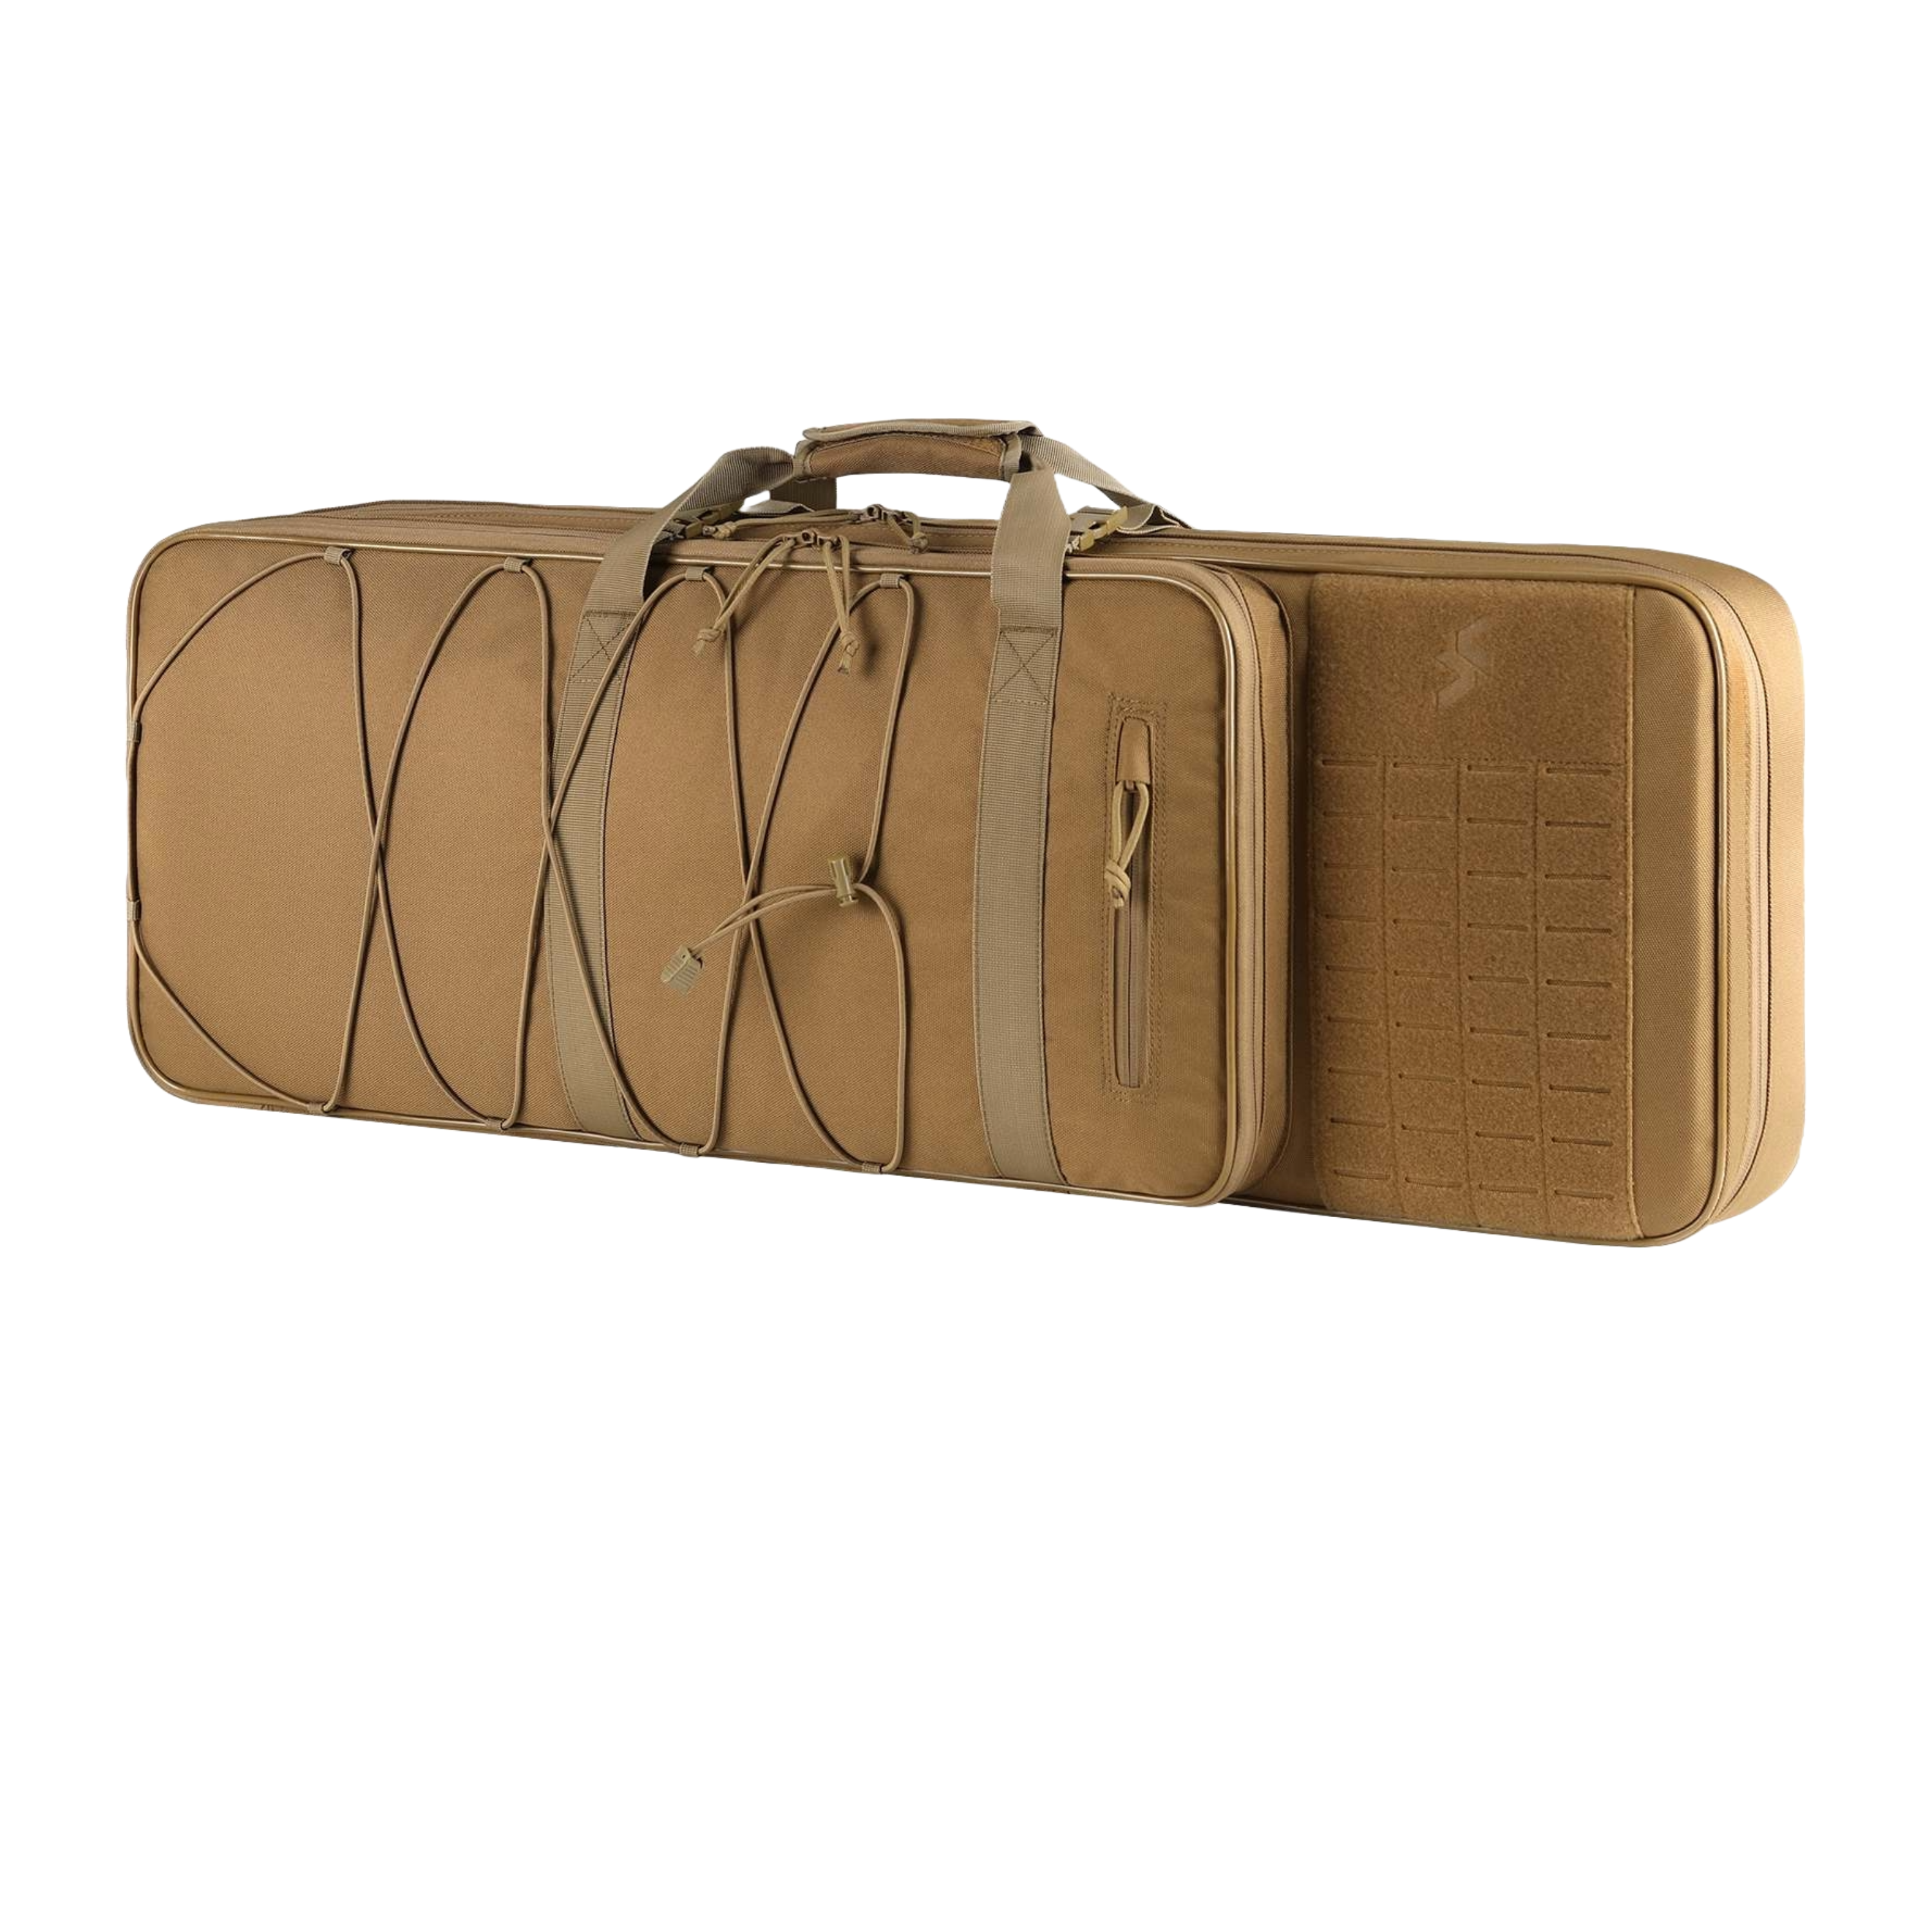 Pro Version Tactical Rifle Case with Enhanced Features and Durability